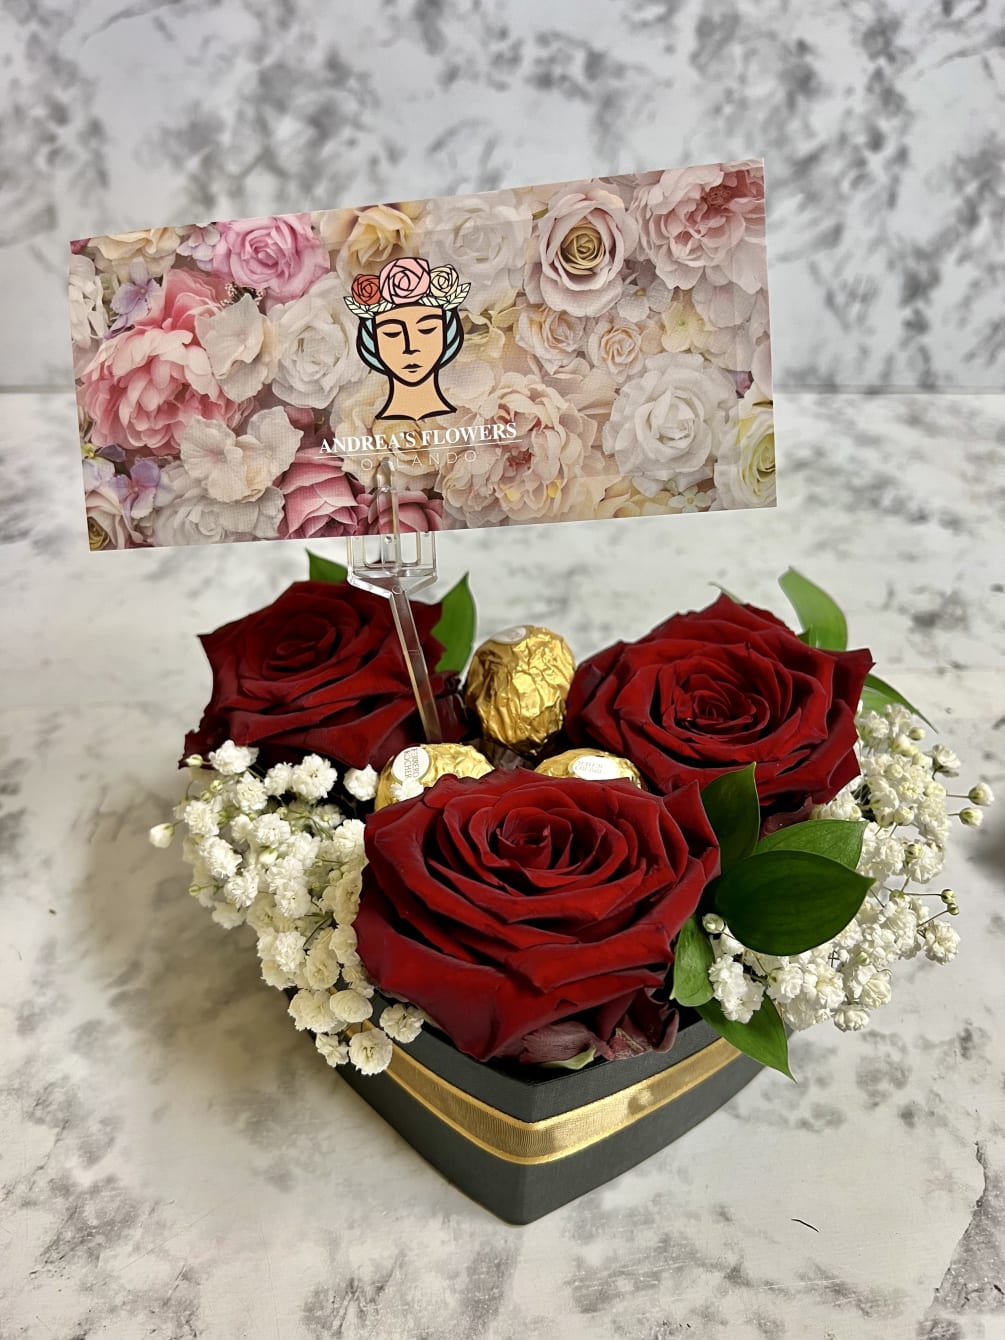 A beautiful heart with our Premium Roses. A small detail, but with